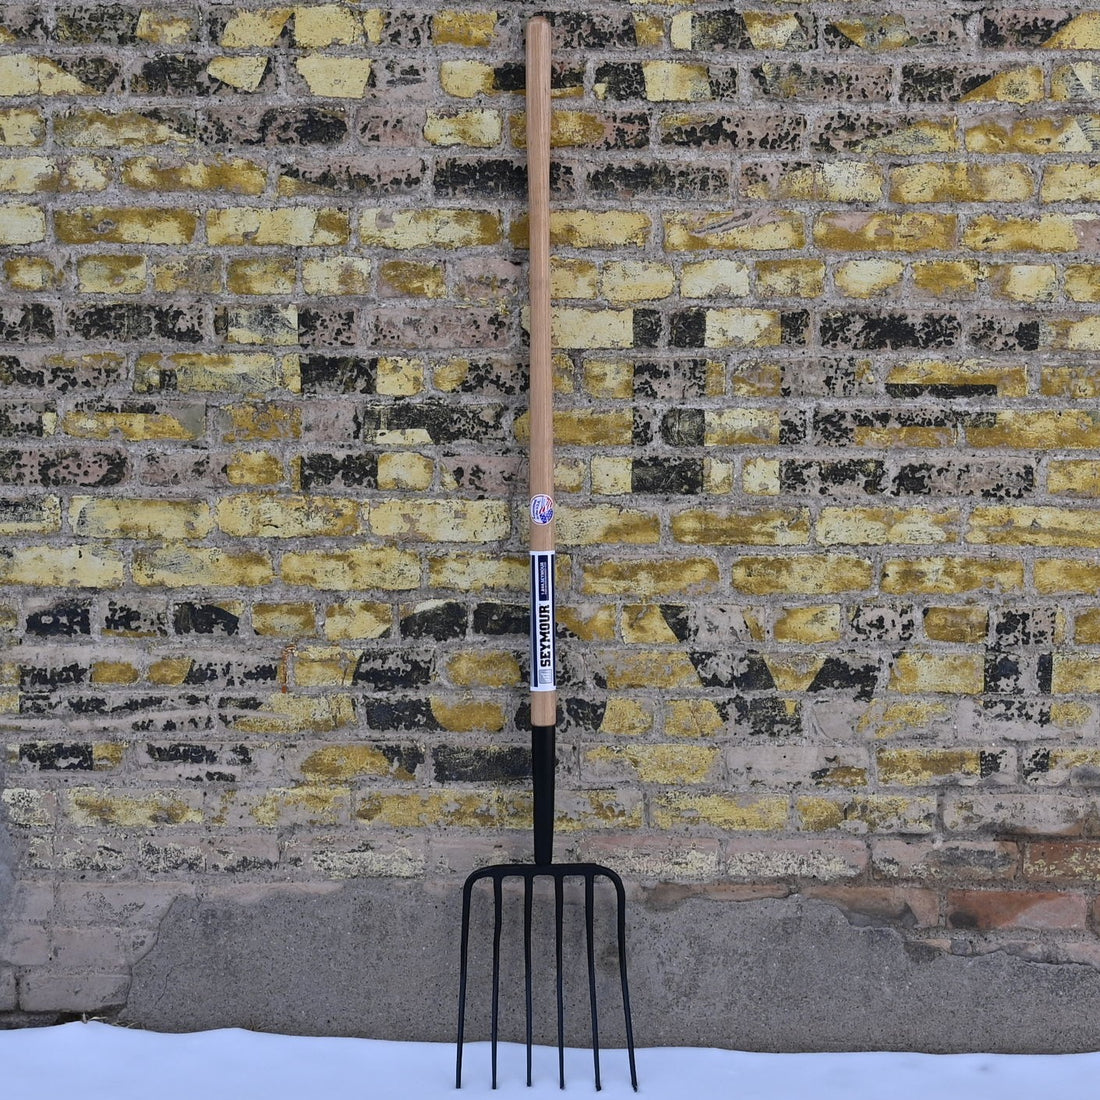 Seymour® 6 Tine Forged Manure Fork W/Hardwood Handle view of pitchfork